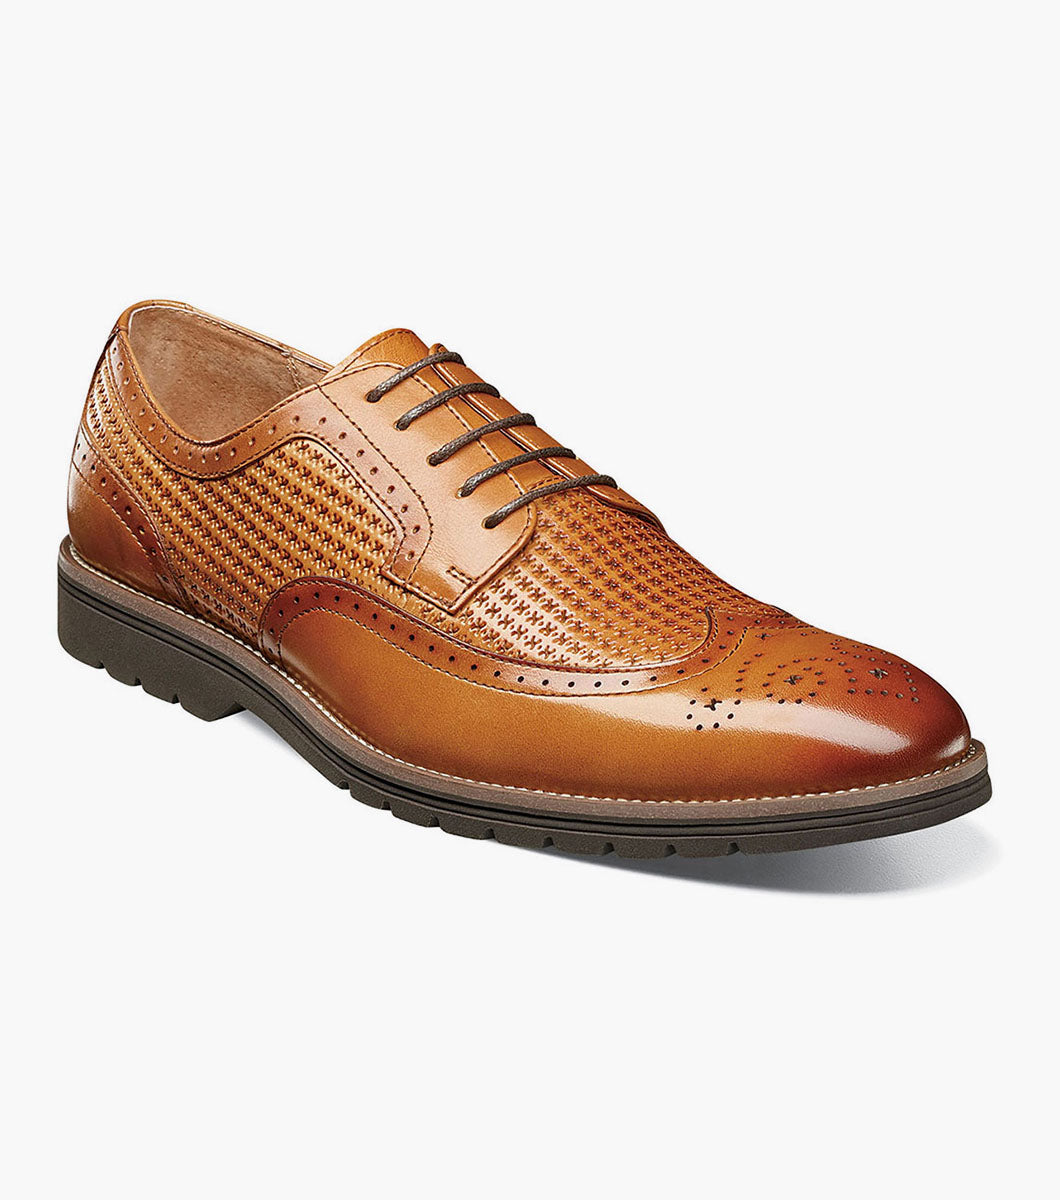 Stacy Adams Emile Leather Wingtip Oxfords Shoes - Tan